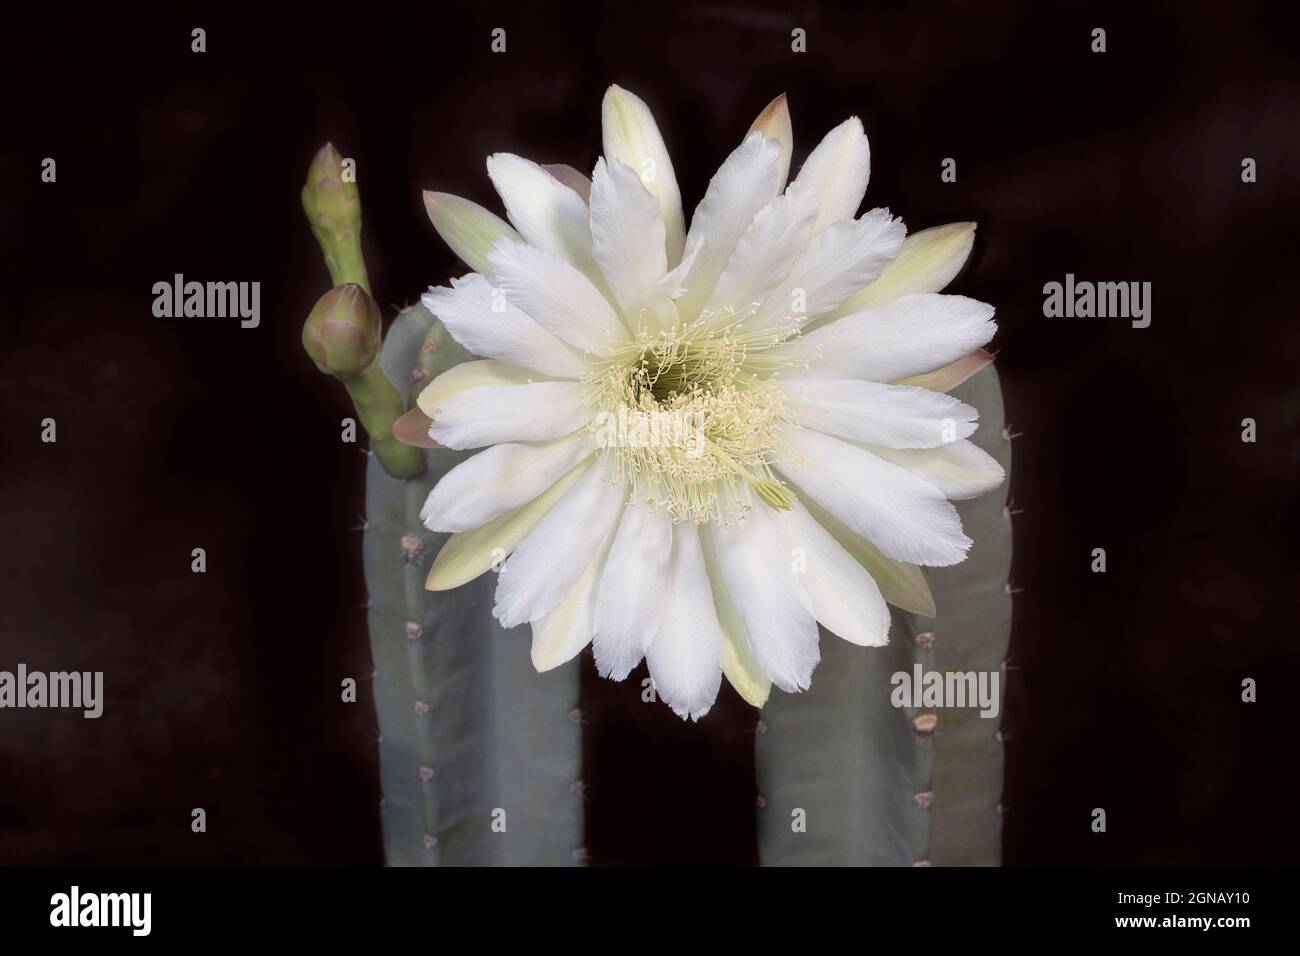 dazzling white night blooming Cereus repandus Peruvian Apple Cactus flower with blurred branches and buds on a black background Stock Photo